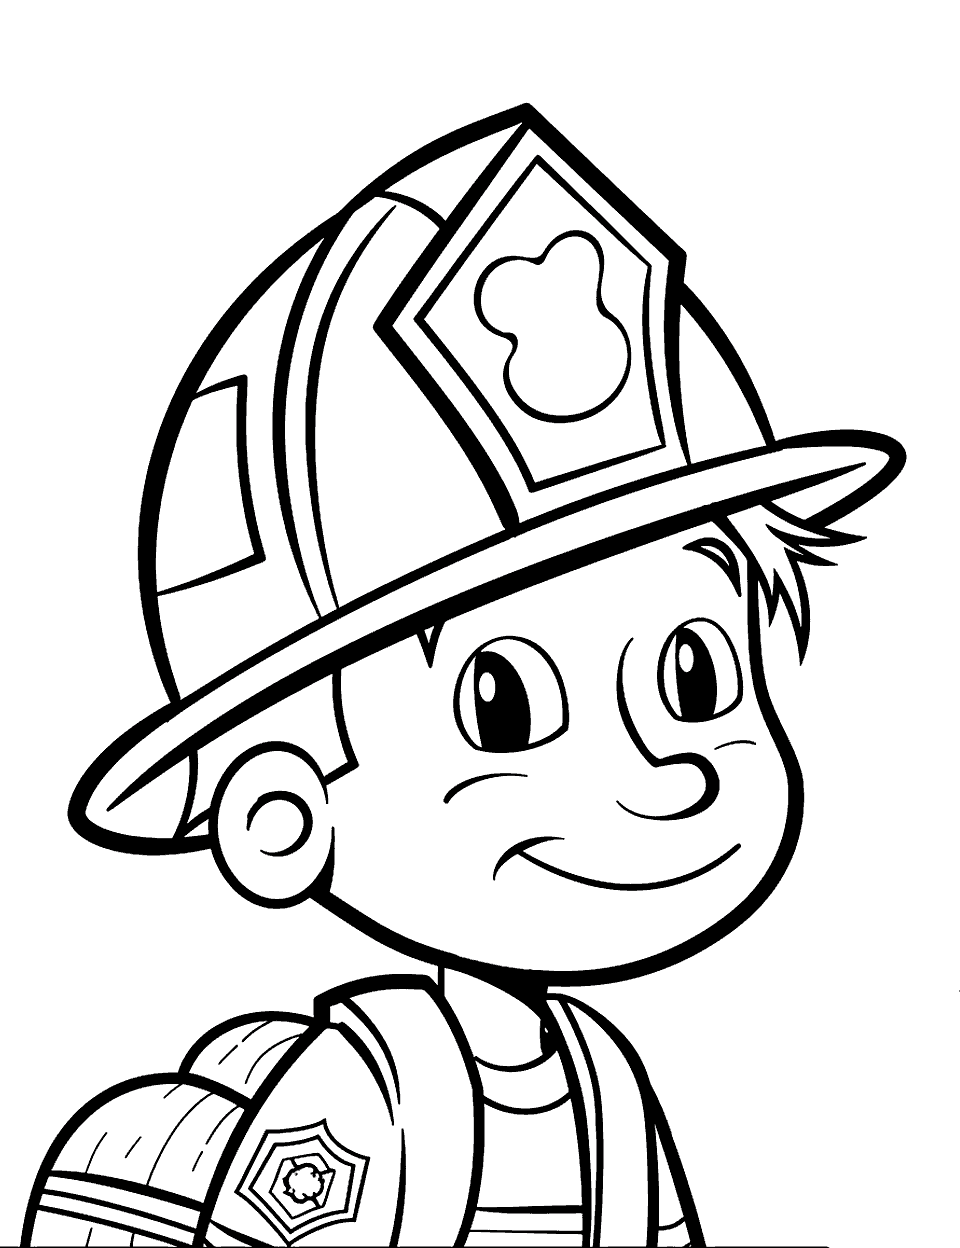 Firefighter Hero Coloring Page - A firefighter ready to go for action.